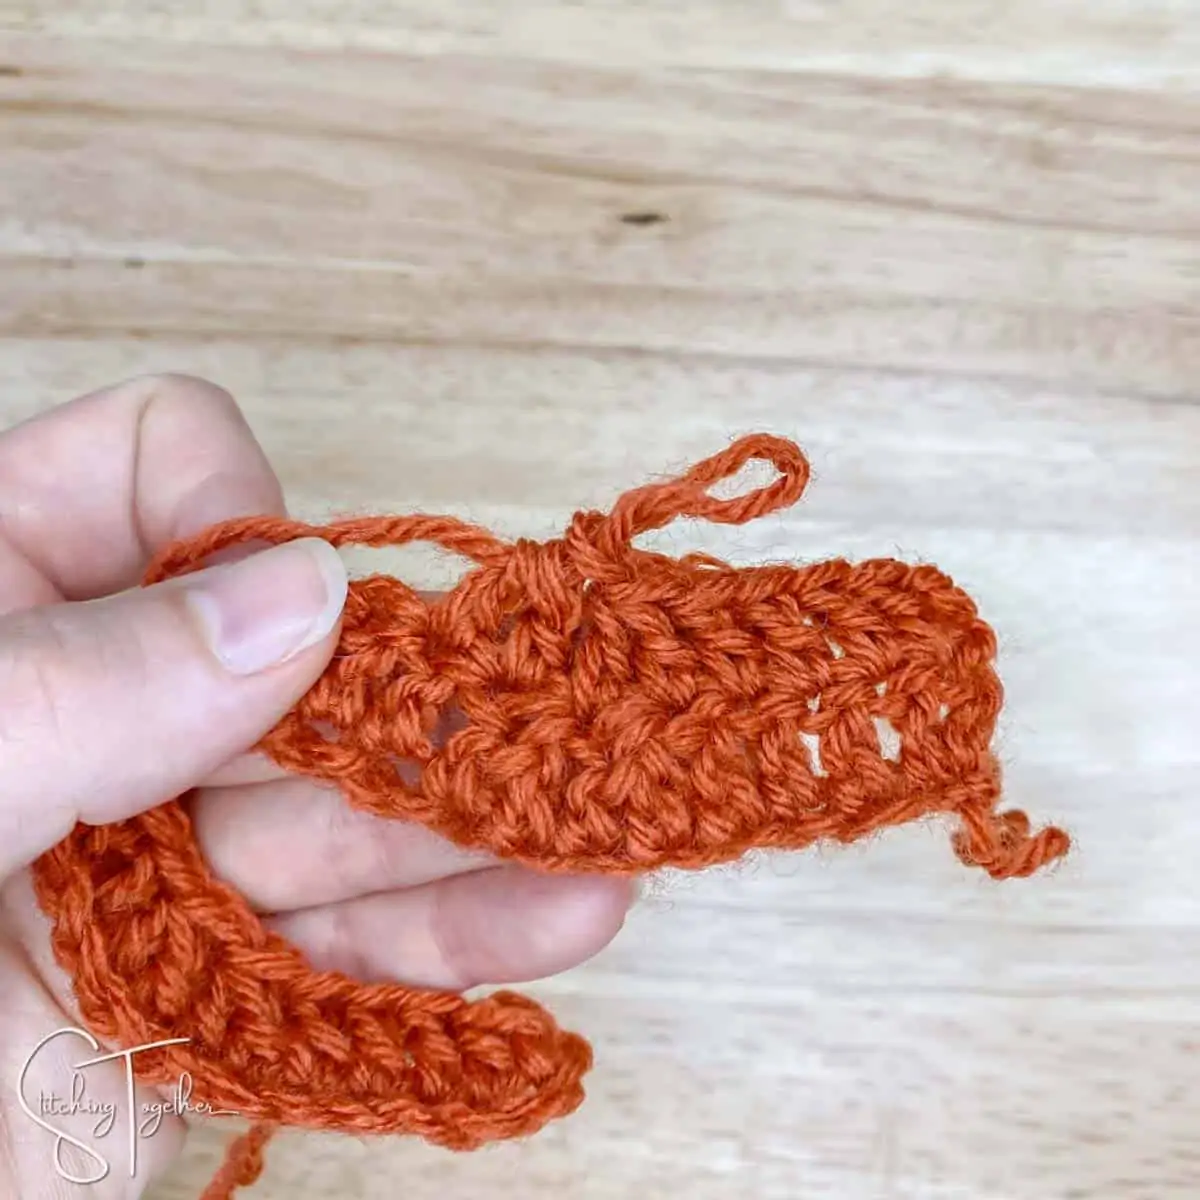 double crochet 2 together